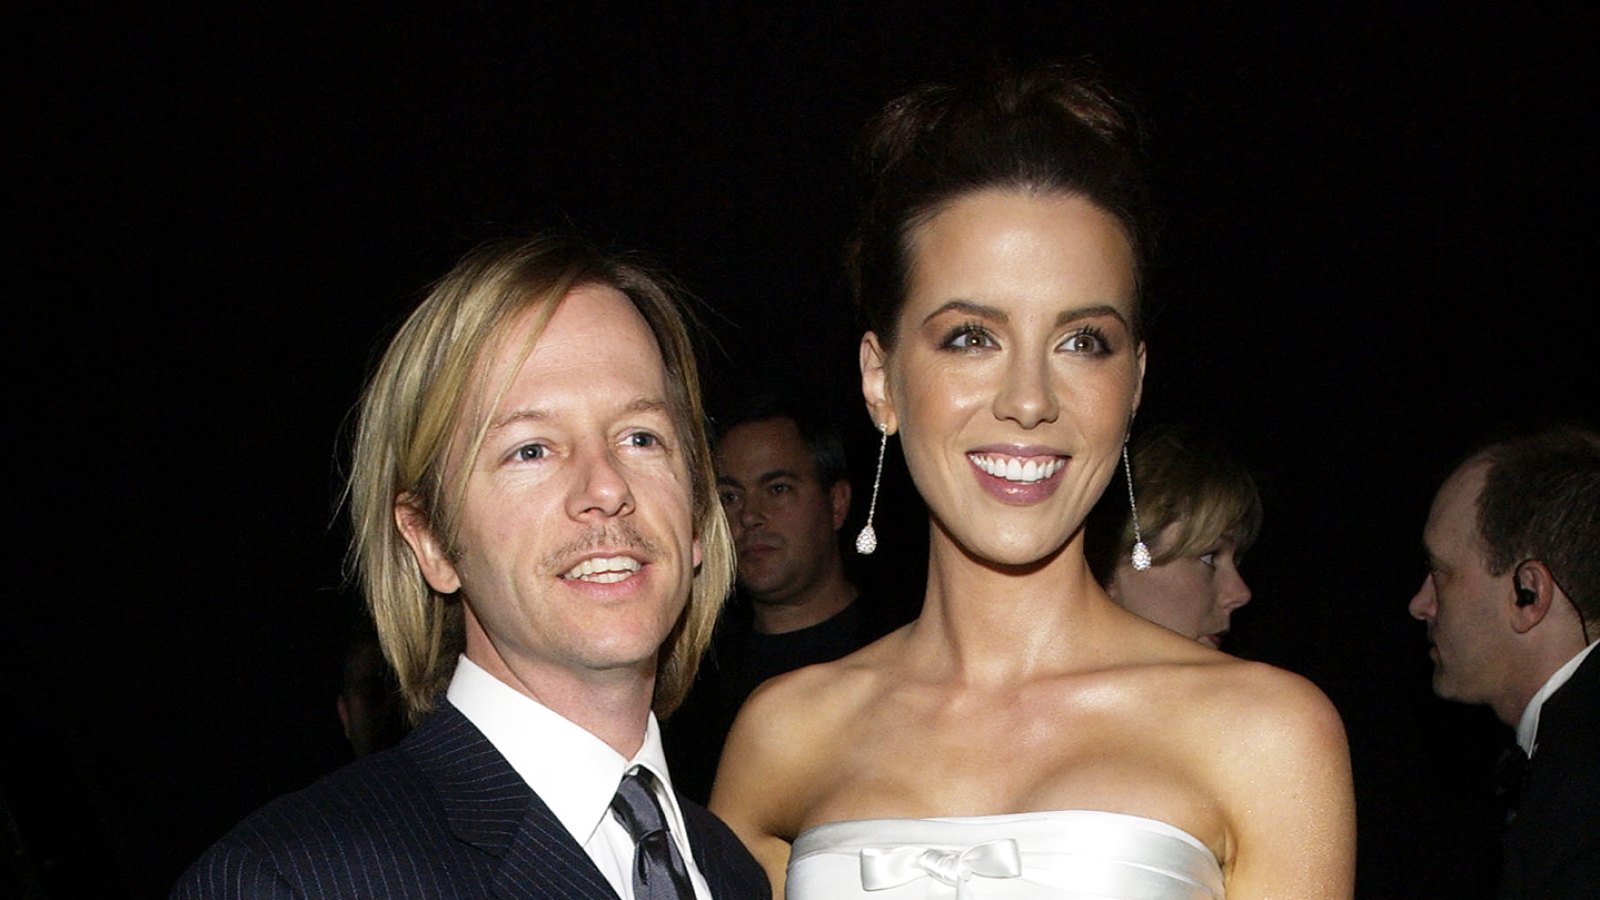 Kate Beckinsale Calls David Spade GrandpaCalls Her Out for Liking Young Men